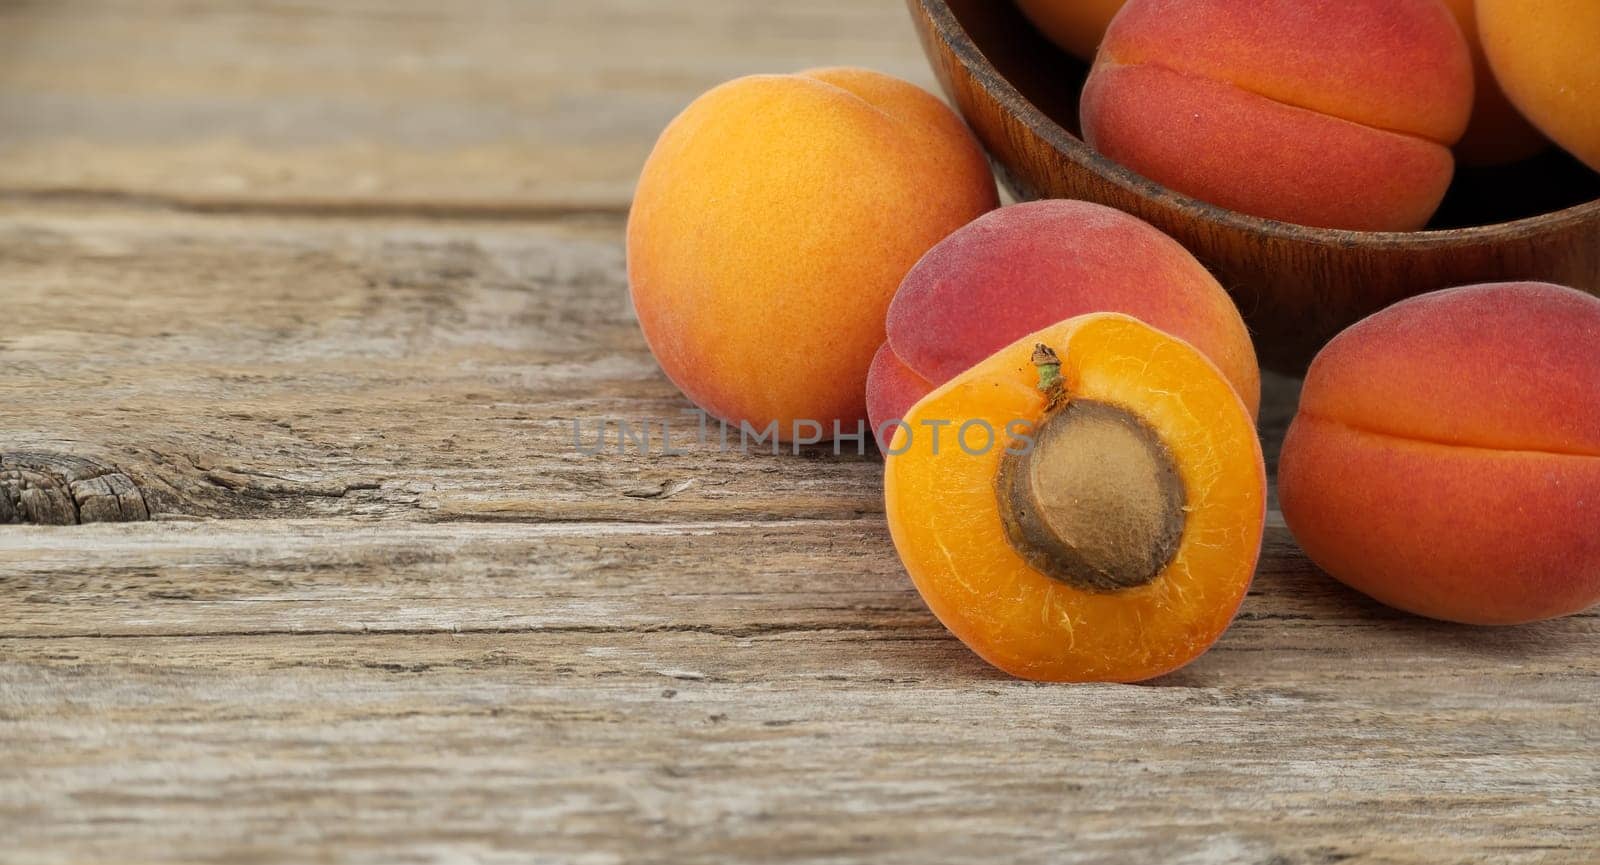 Collection of ripe whole apricots and one cut in half to reveal its interior, rustic wooden table